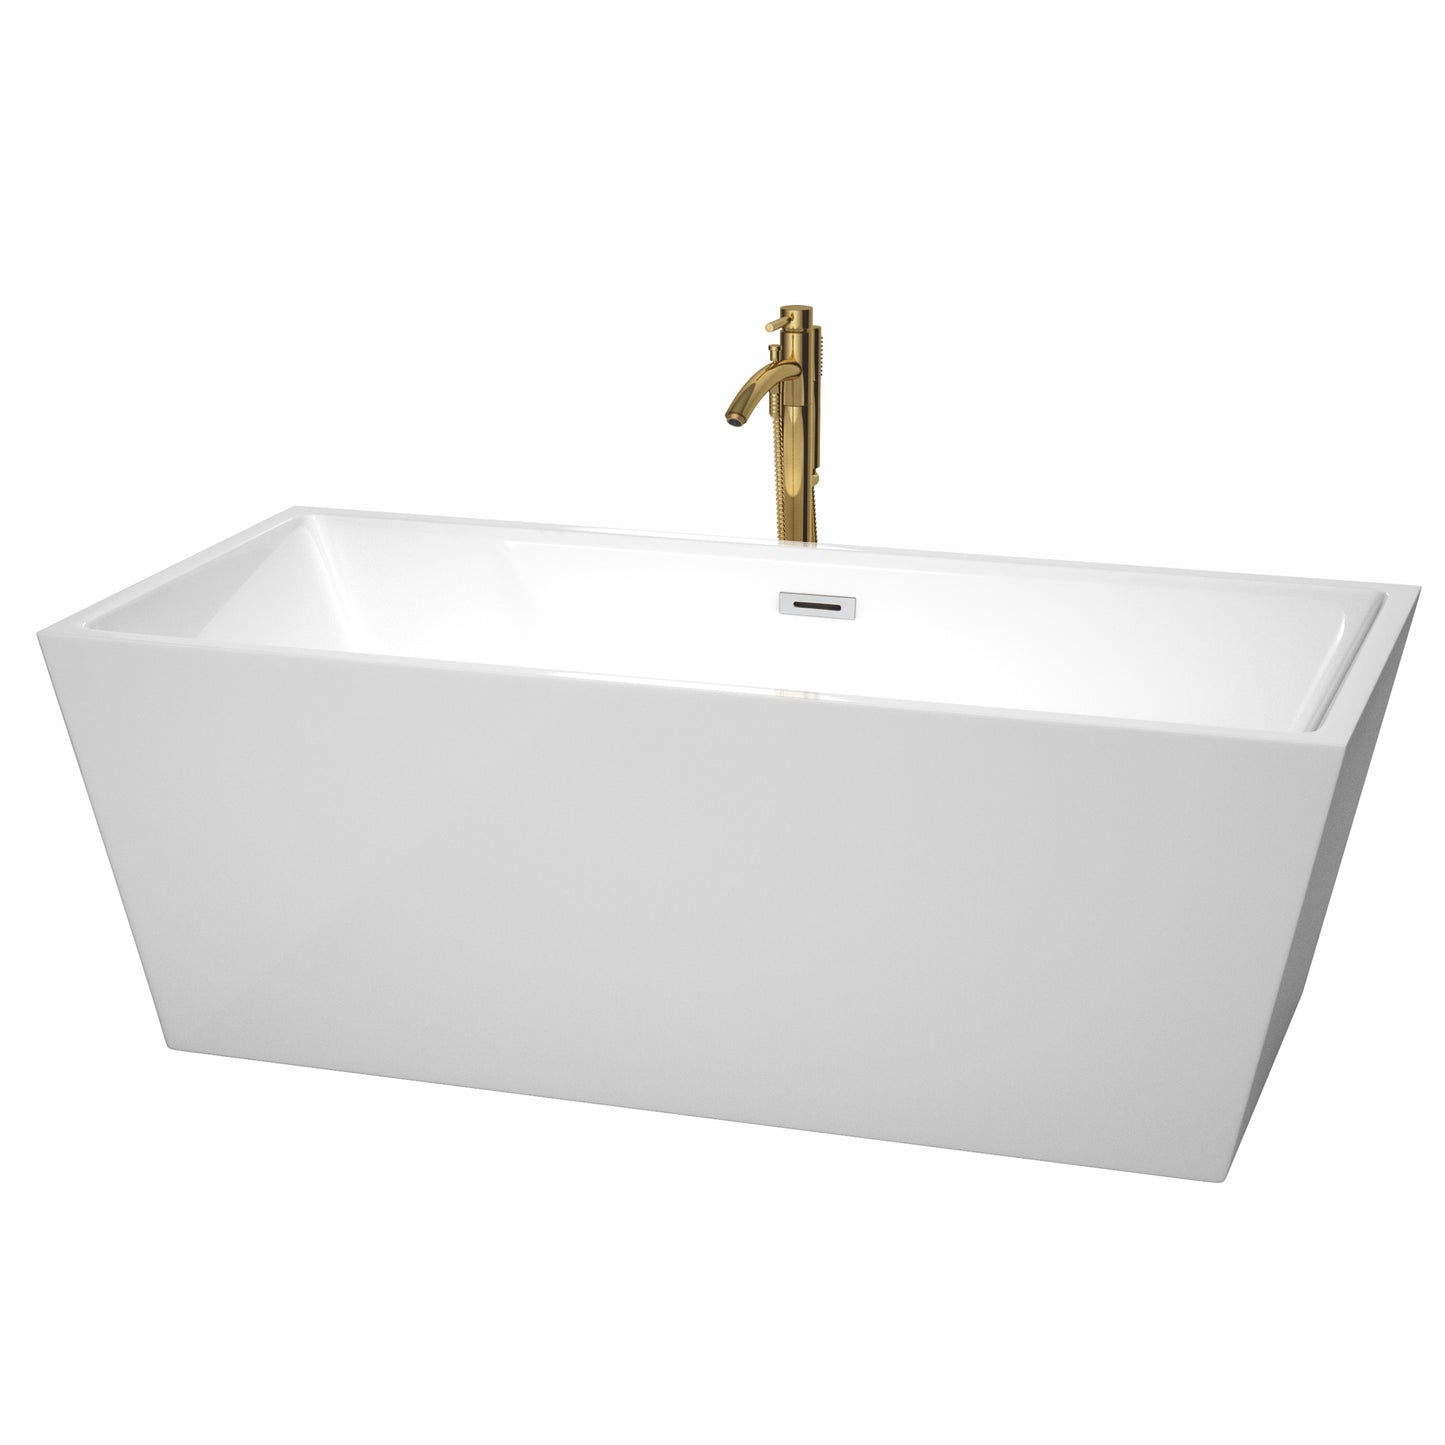 Wyndham Collection Sara 67 Inch Freestanding Bathtub in White with Floor Mounted Faucet, Drain and Overflow Trim - Luxe Bathroom Vanities